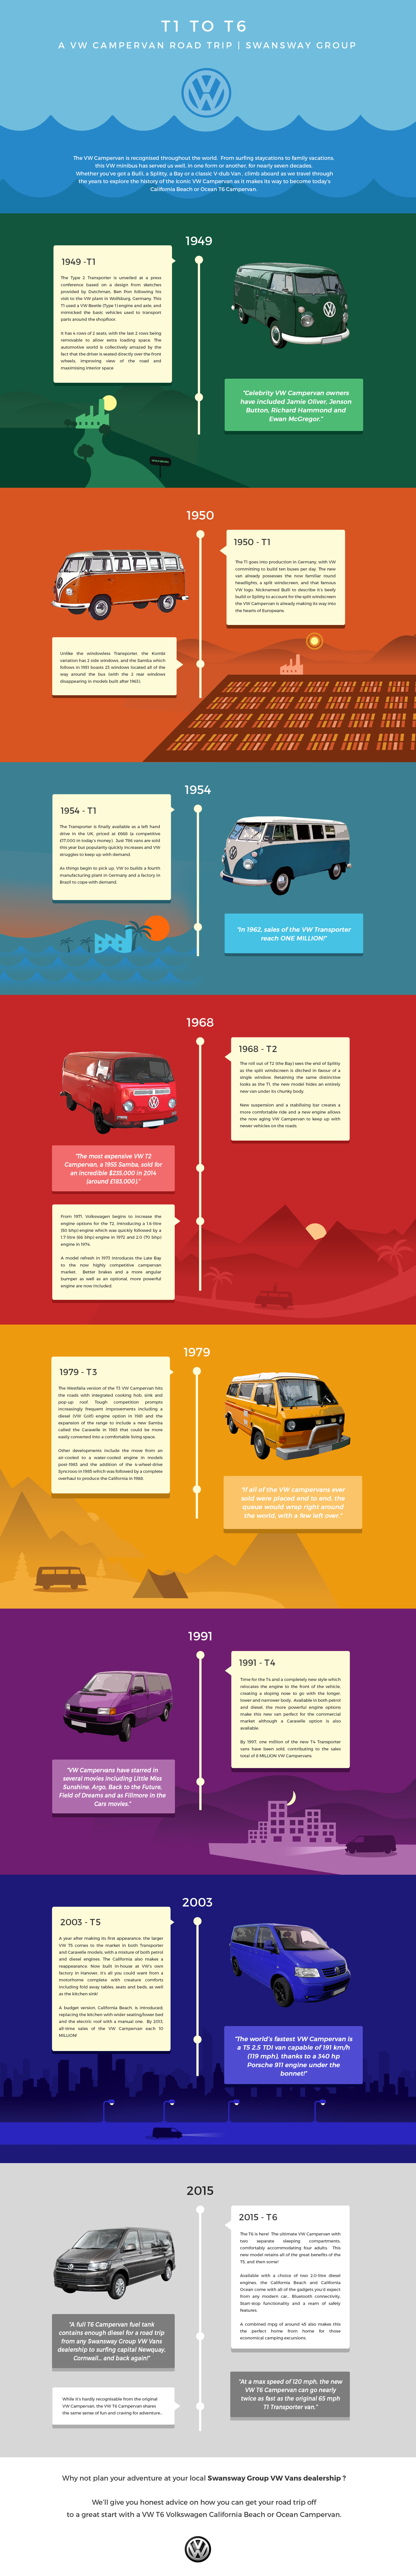 The History of the VW Campervan by the Swansway Group